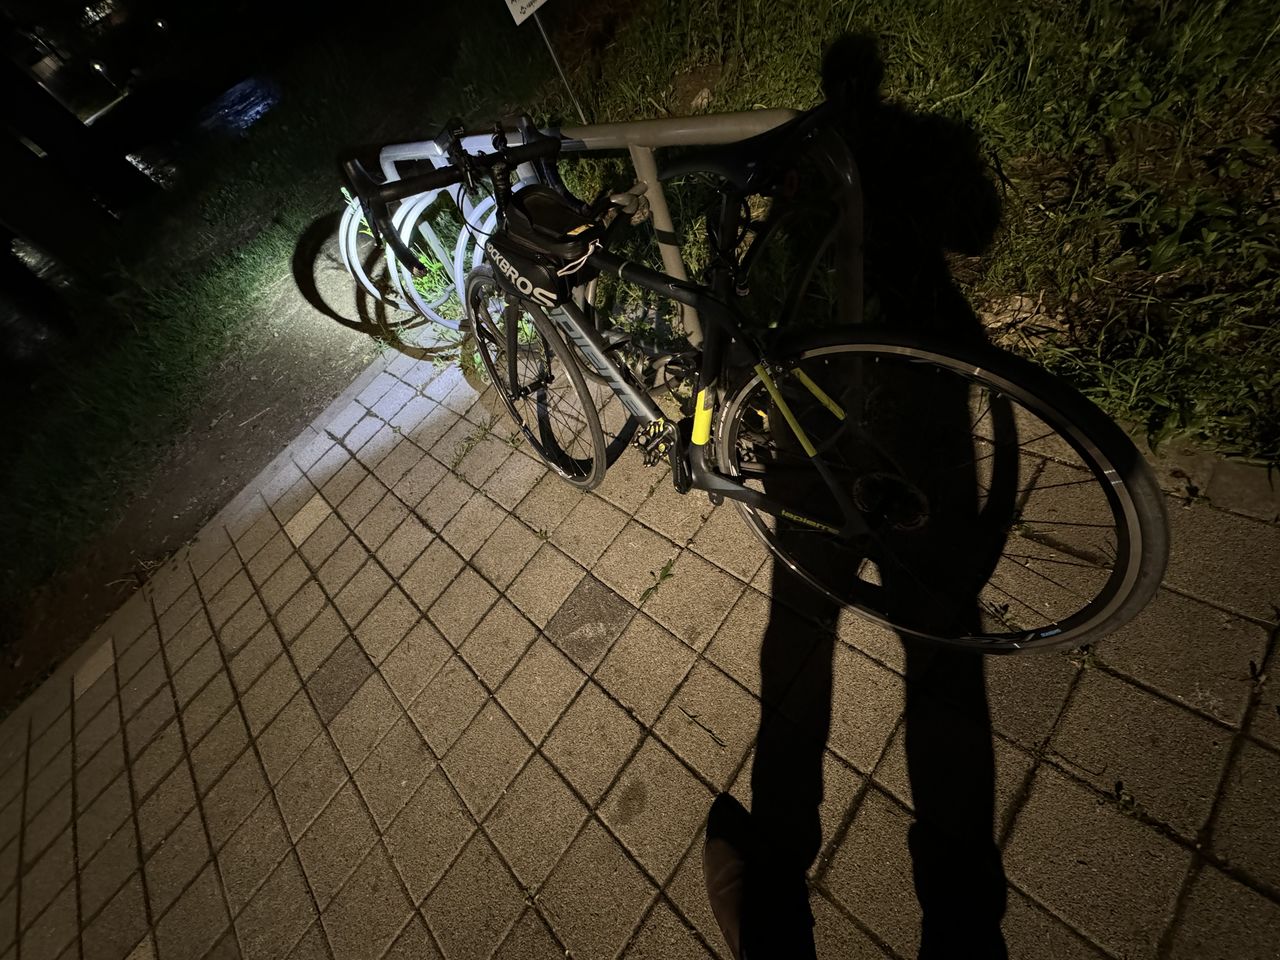 bicycle, darkness, transportation, night, black, light, land vehicle, mode of transportation, footpath, street, city, vehicle, shadow, high angle view, one person, nature, sidewalk, sports equipment, outdoors, wheel, cycling, architecture, lifestyles